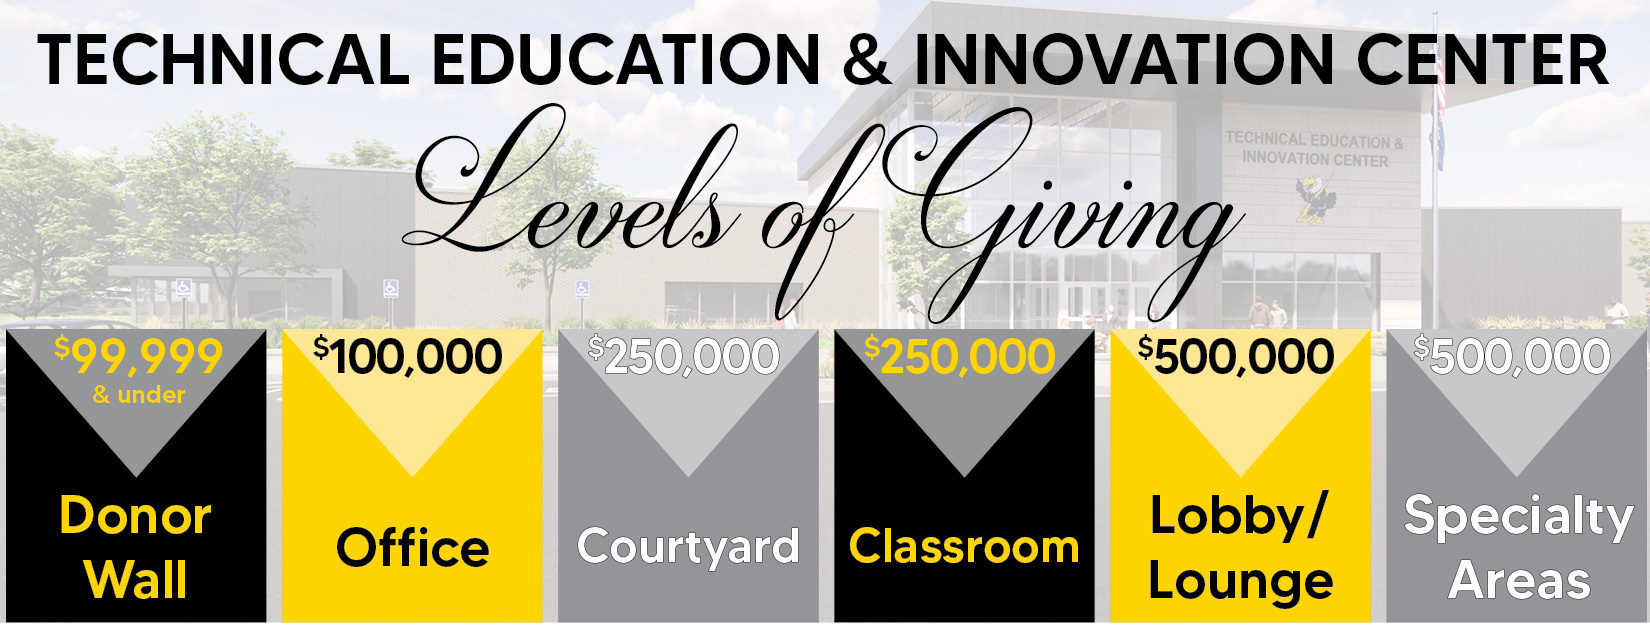 The Technical Education & Innovation Levels of Giving.